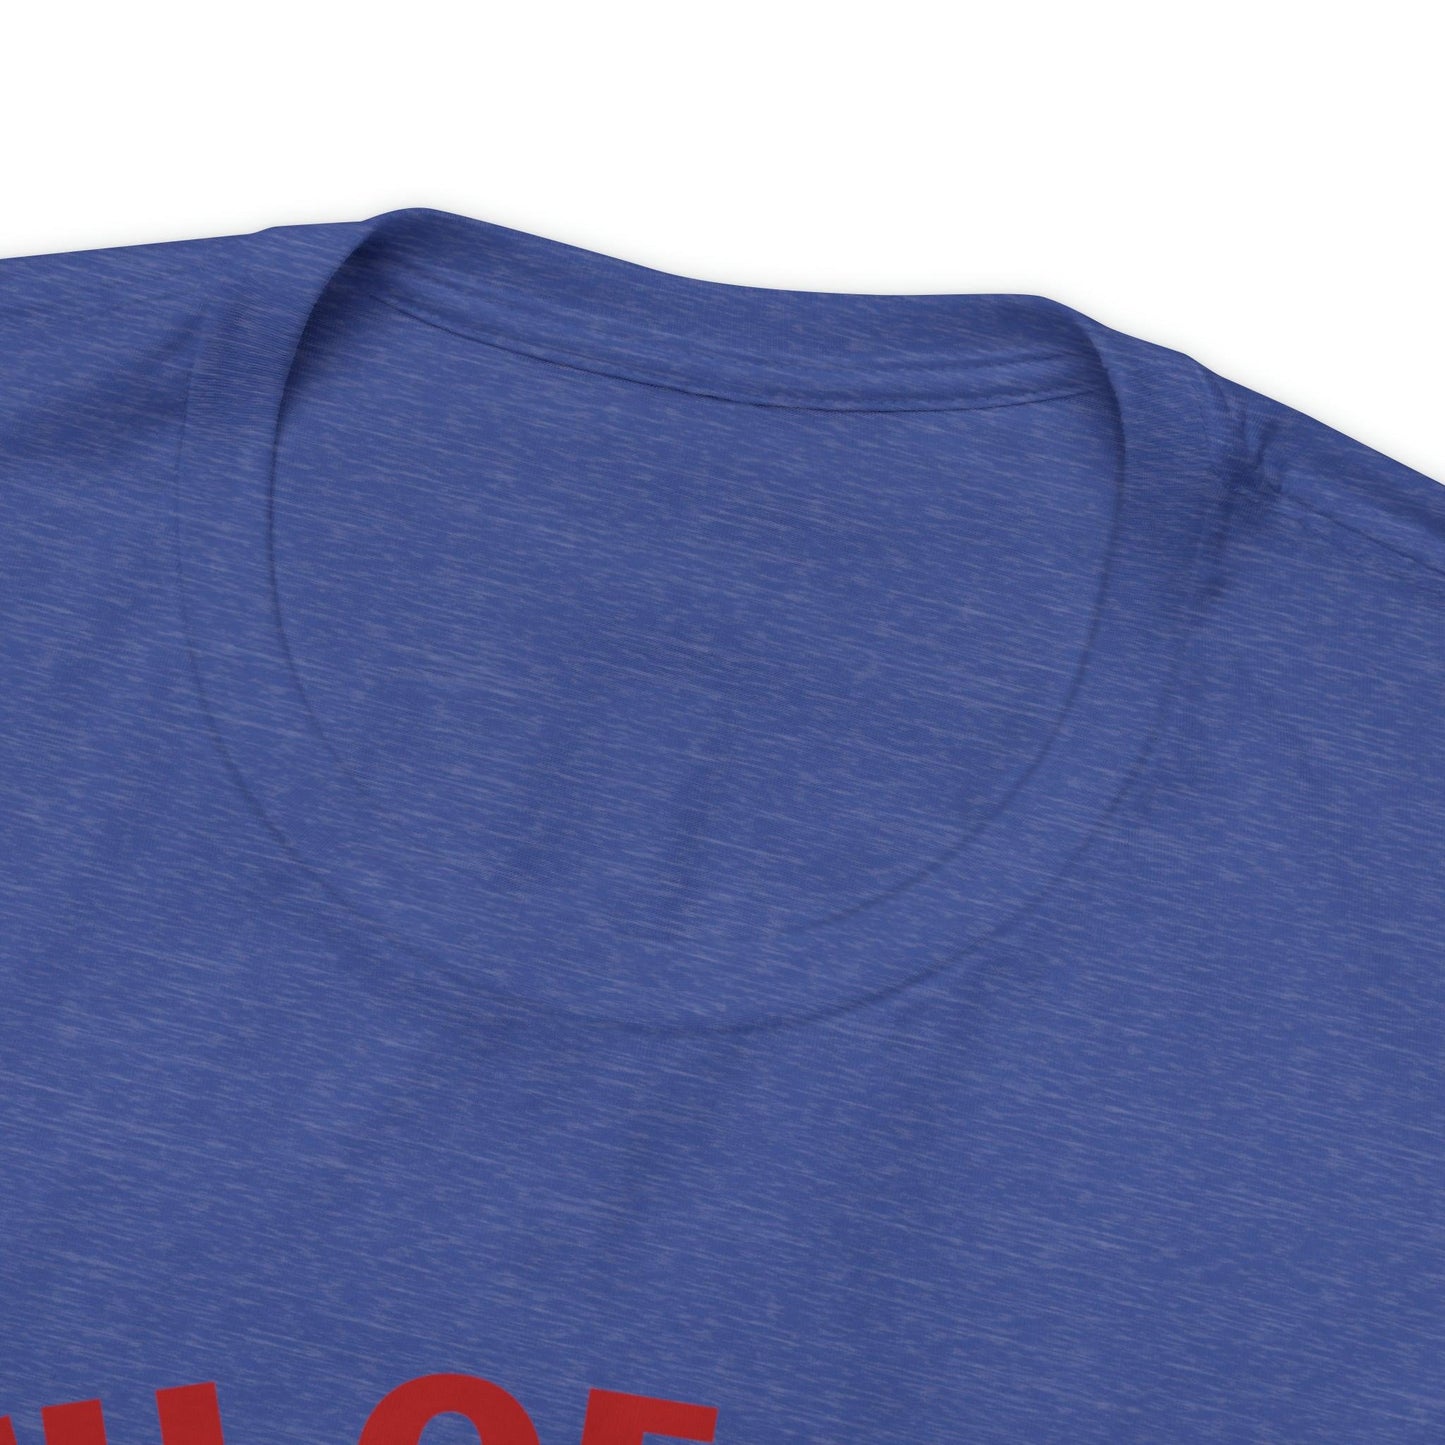 Celebrate Independence Day with Patriotic Shirts: Land of the free Shirts for Women and Men - Giftsmojo